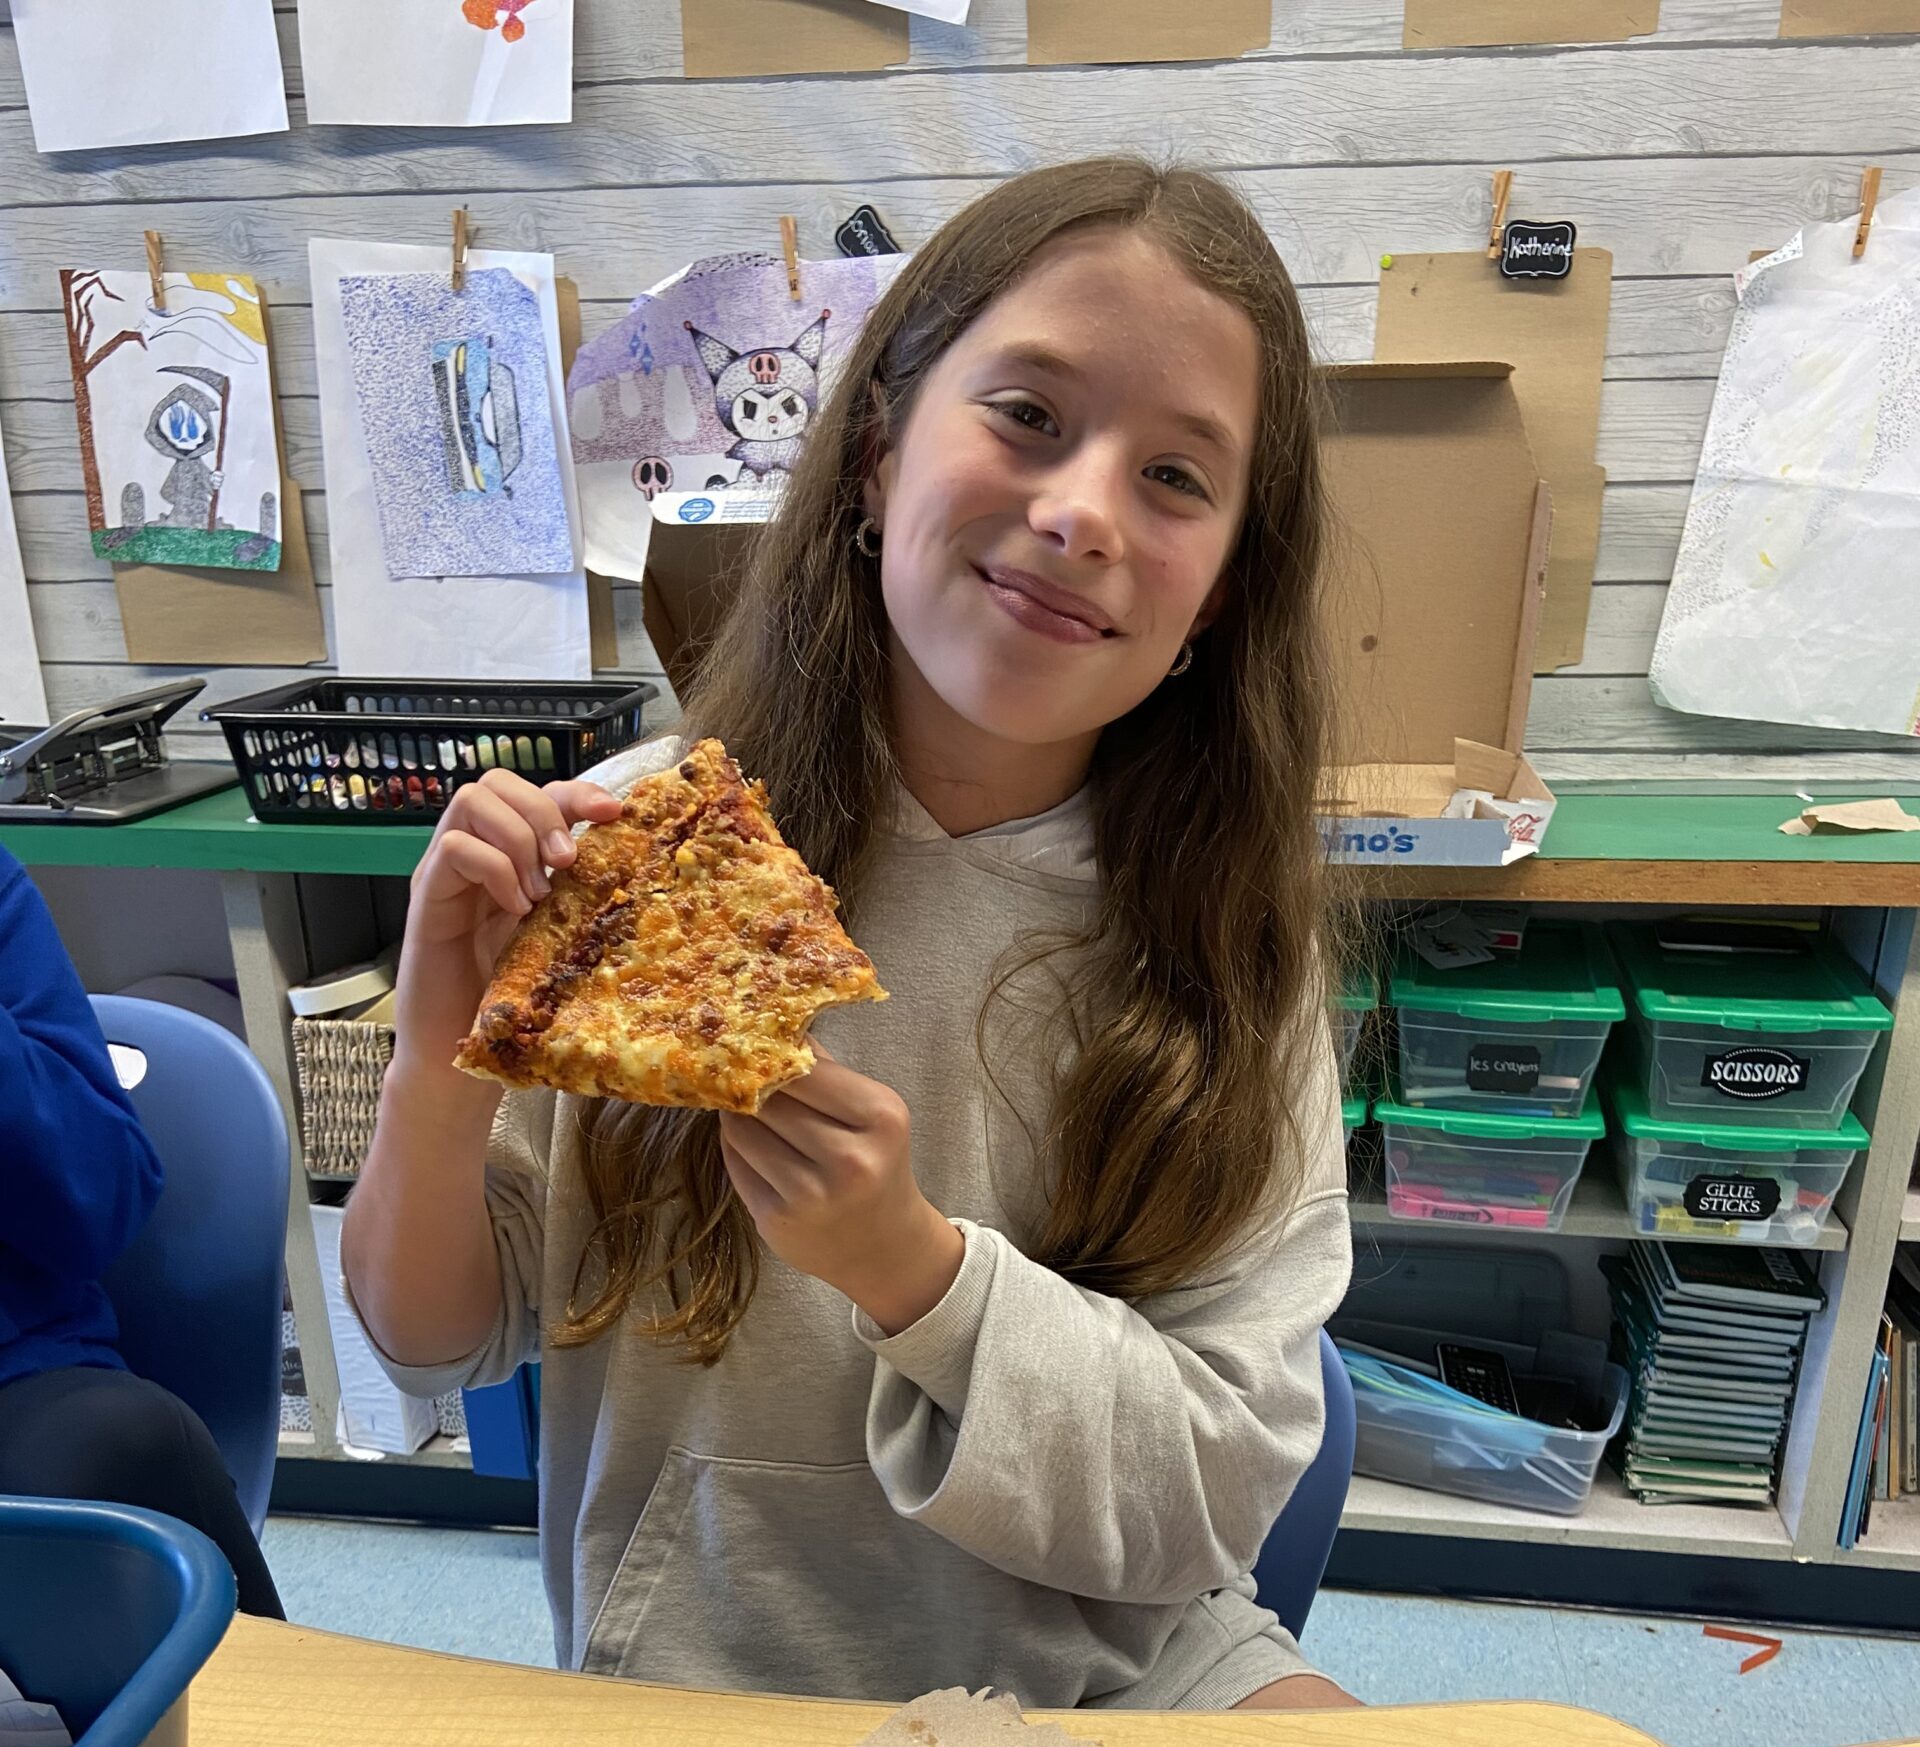 Photo of Ellyot enjoying pizza at her pizza party in school.